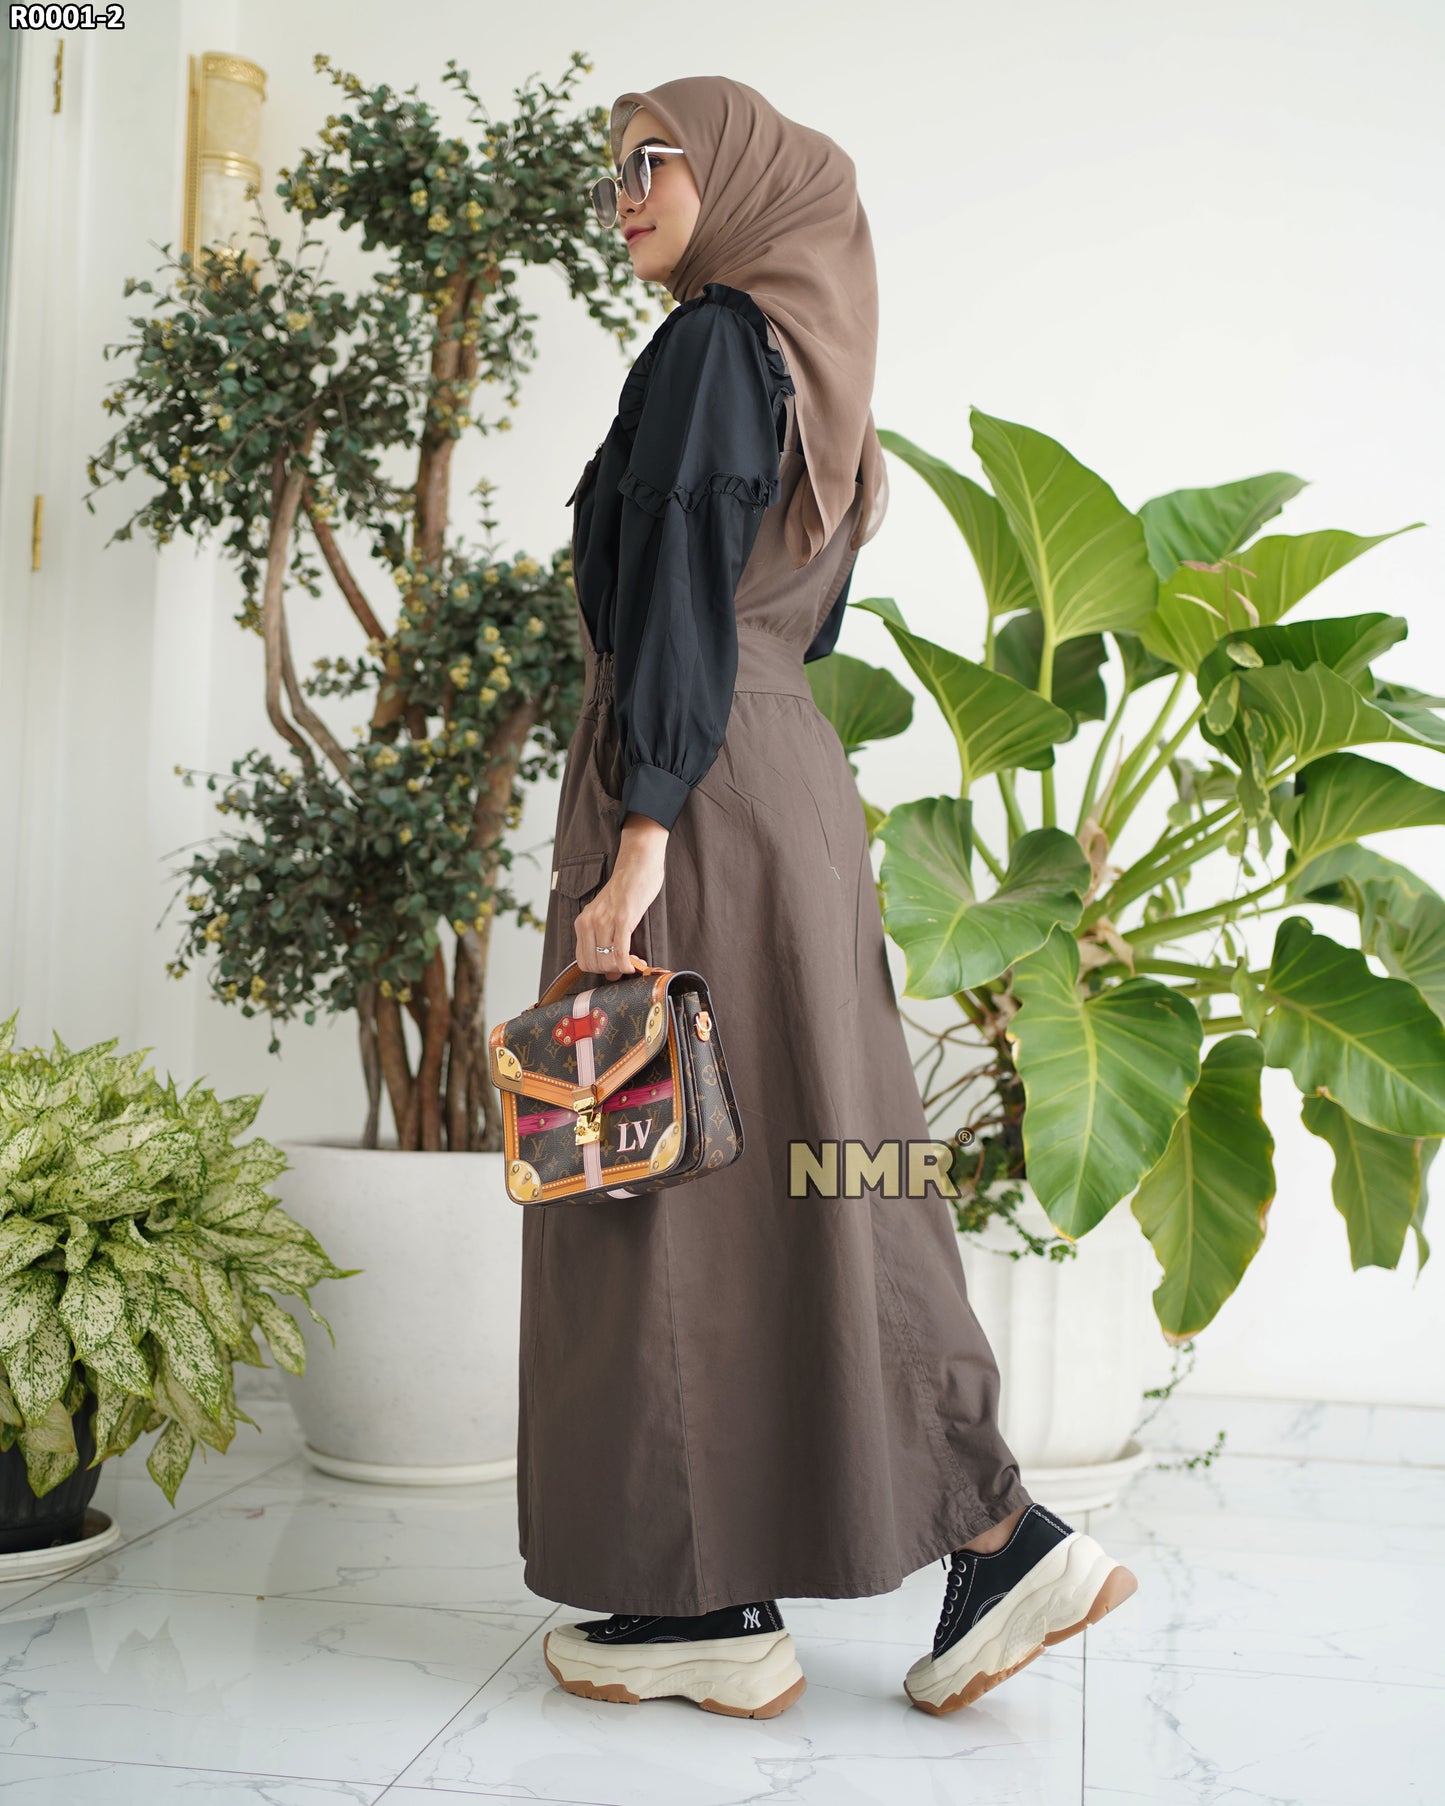 NMR Gamis Jumpsuit Overall Baby Canvas Vol R001-2